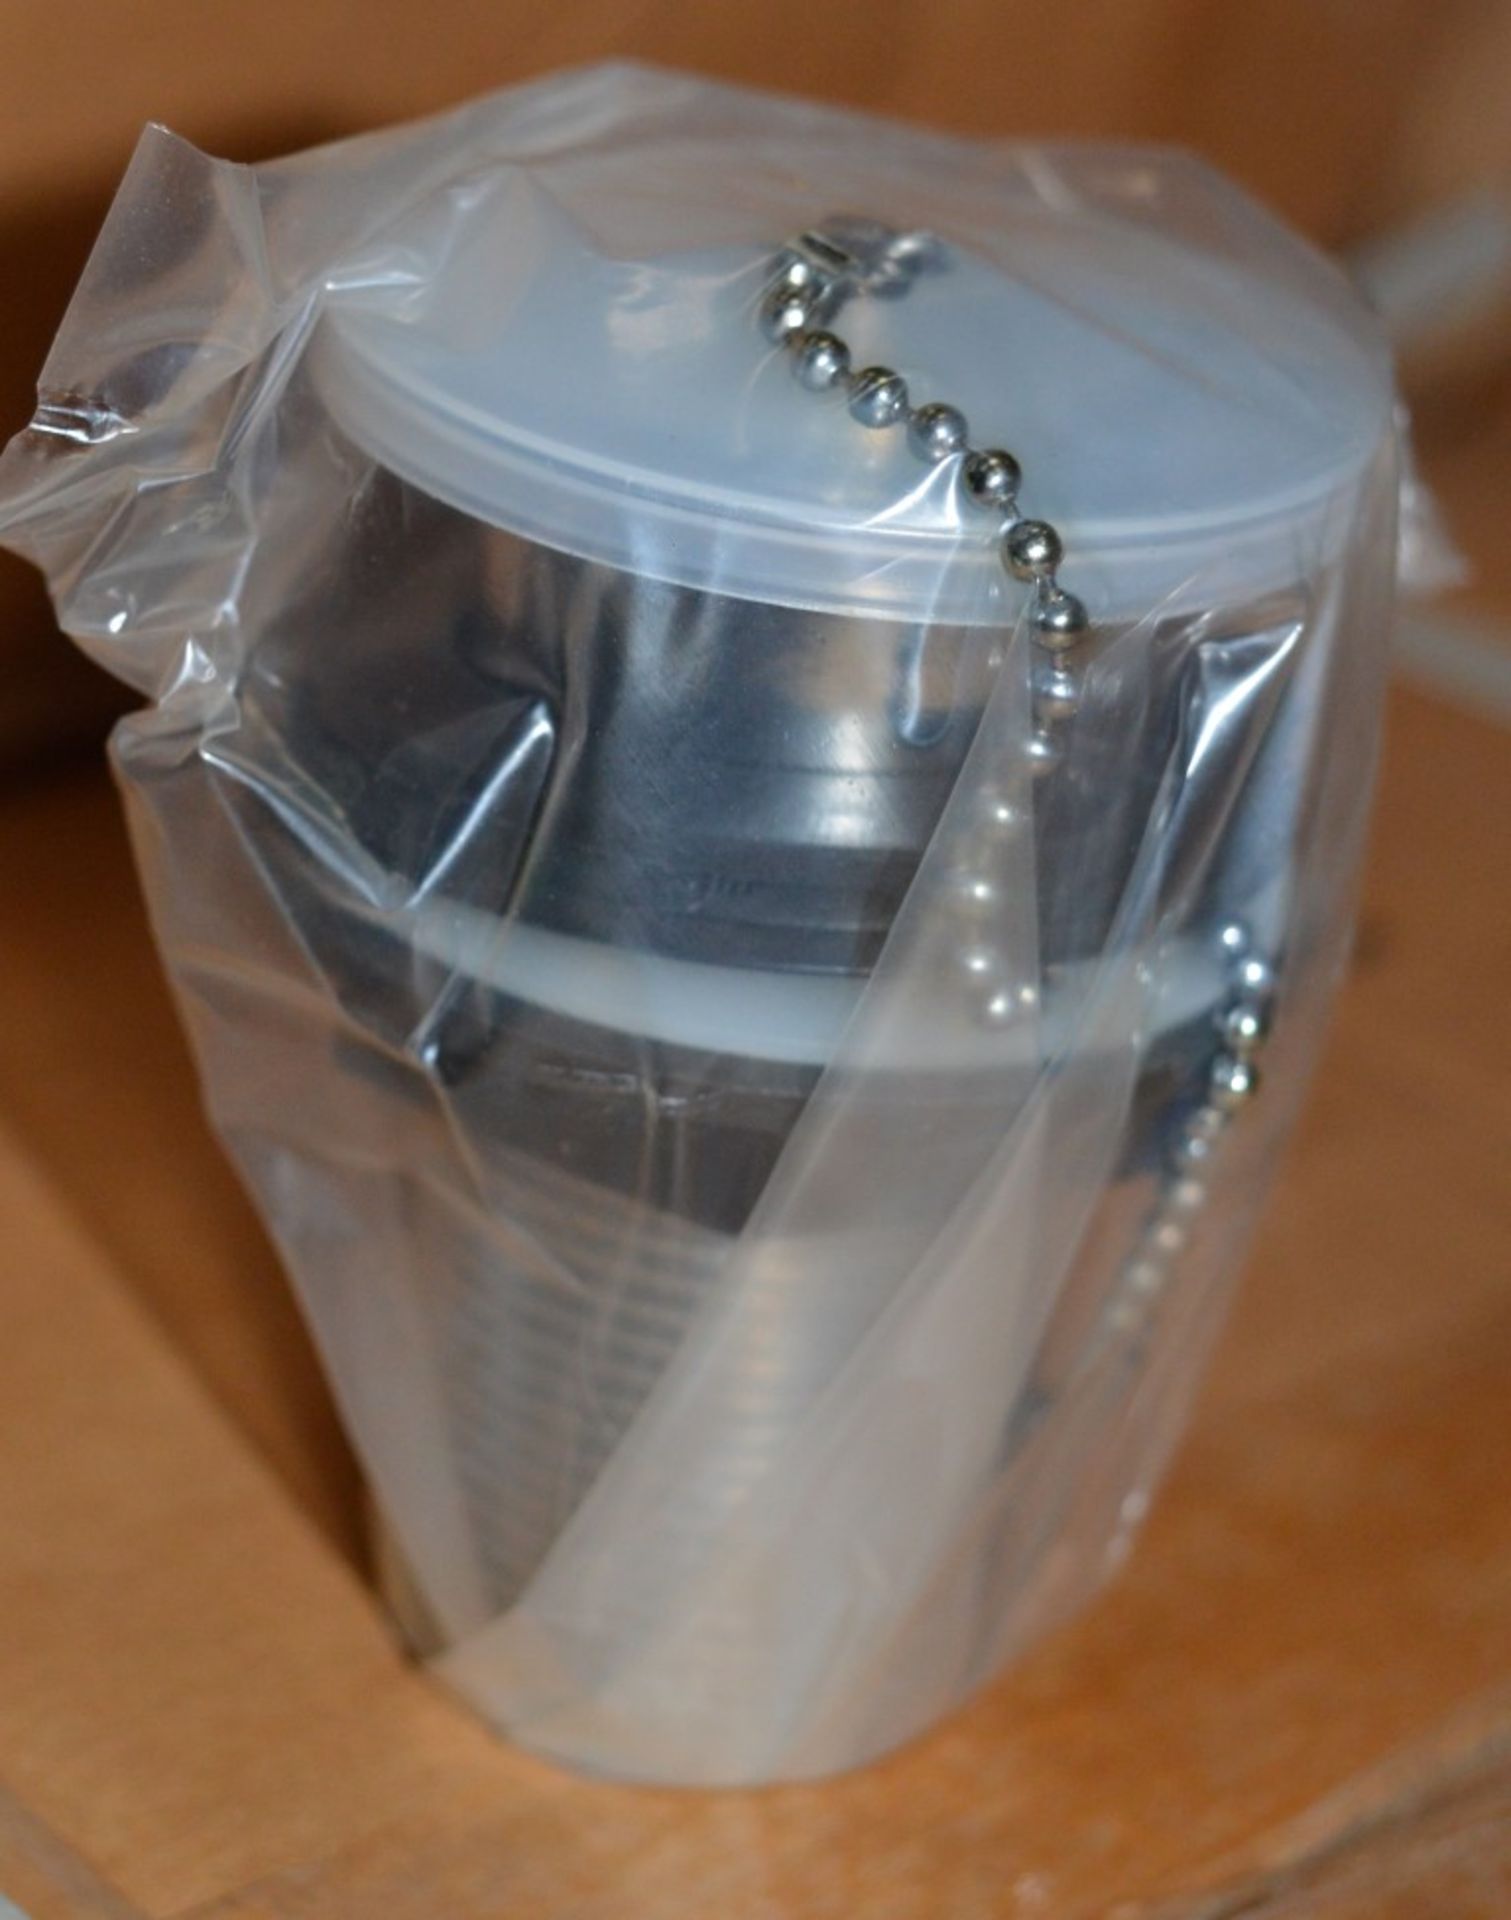 200 x Vogue Arran Chrome Basin Waste Plug Fittings With Chain and Plugs - Brand New Boxed Stock - - Image 3 of 3